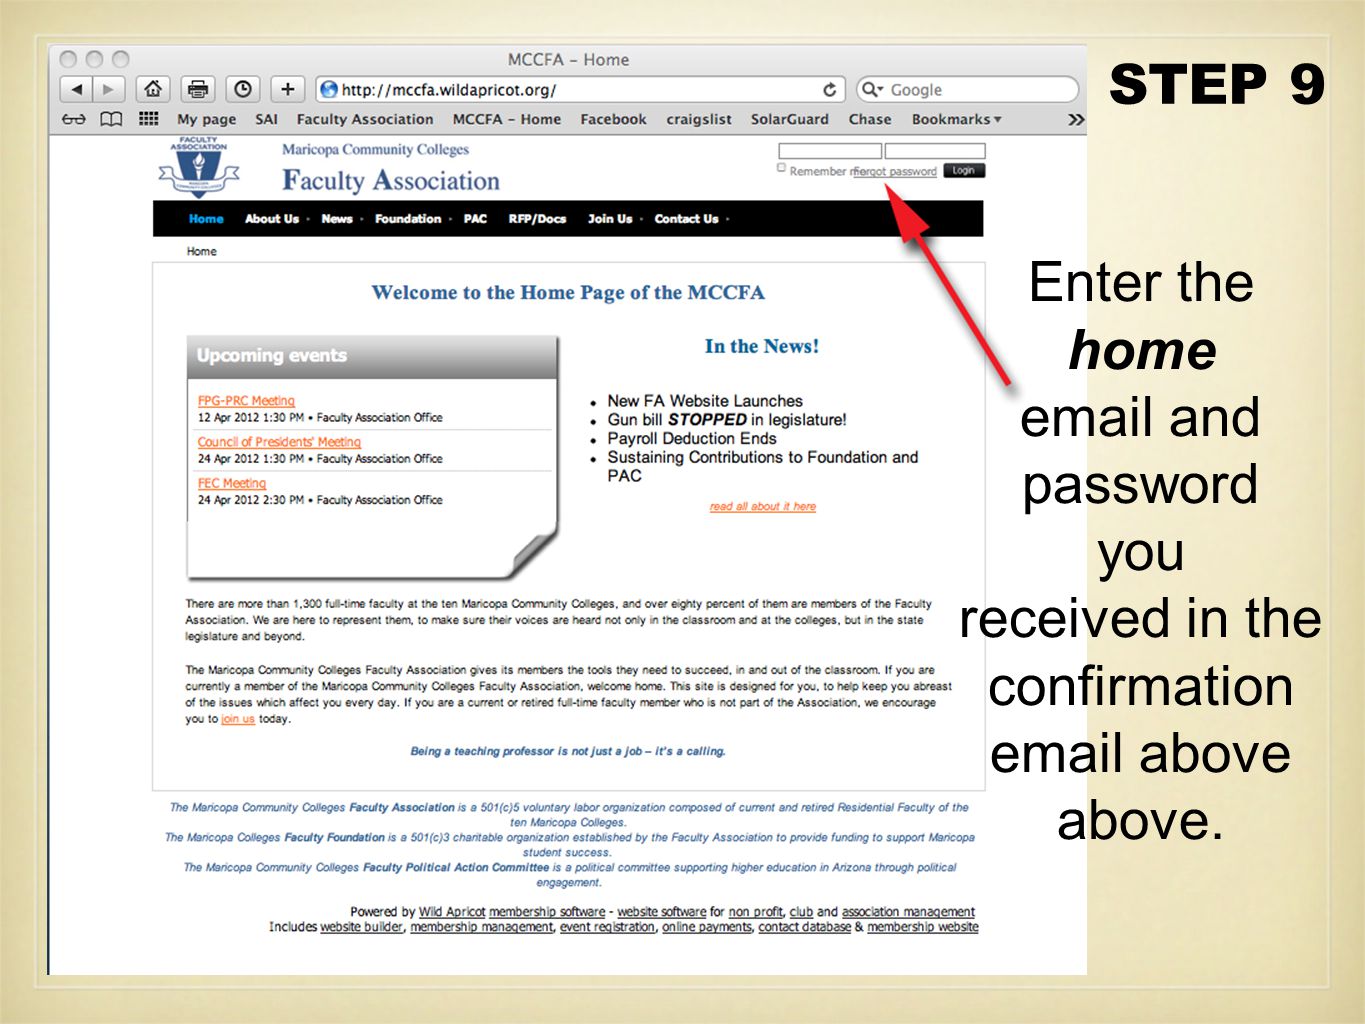 Enter the home  and password you received in the confirmation  above above. STEP 9